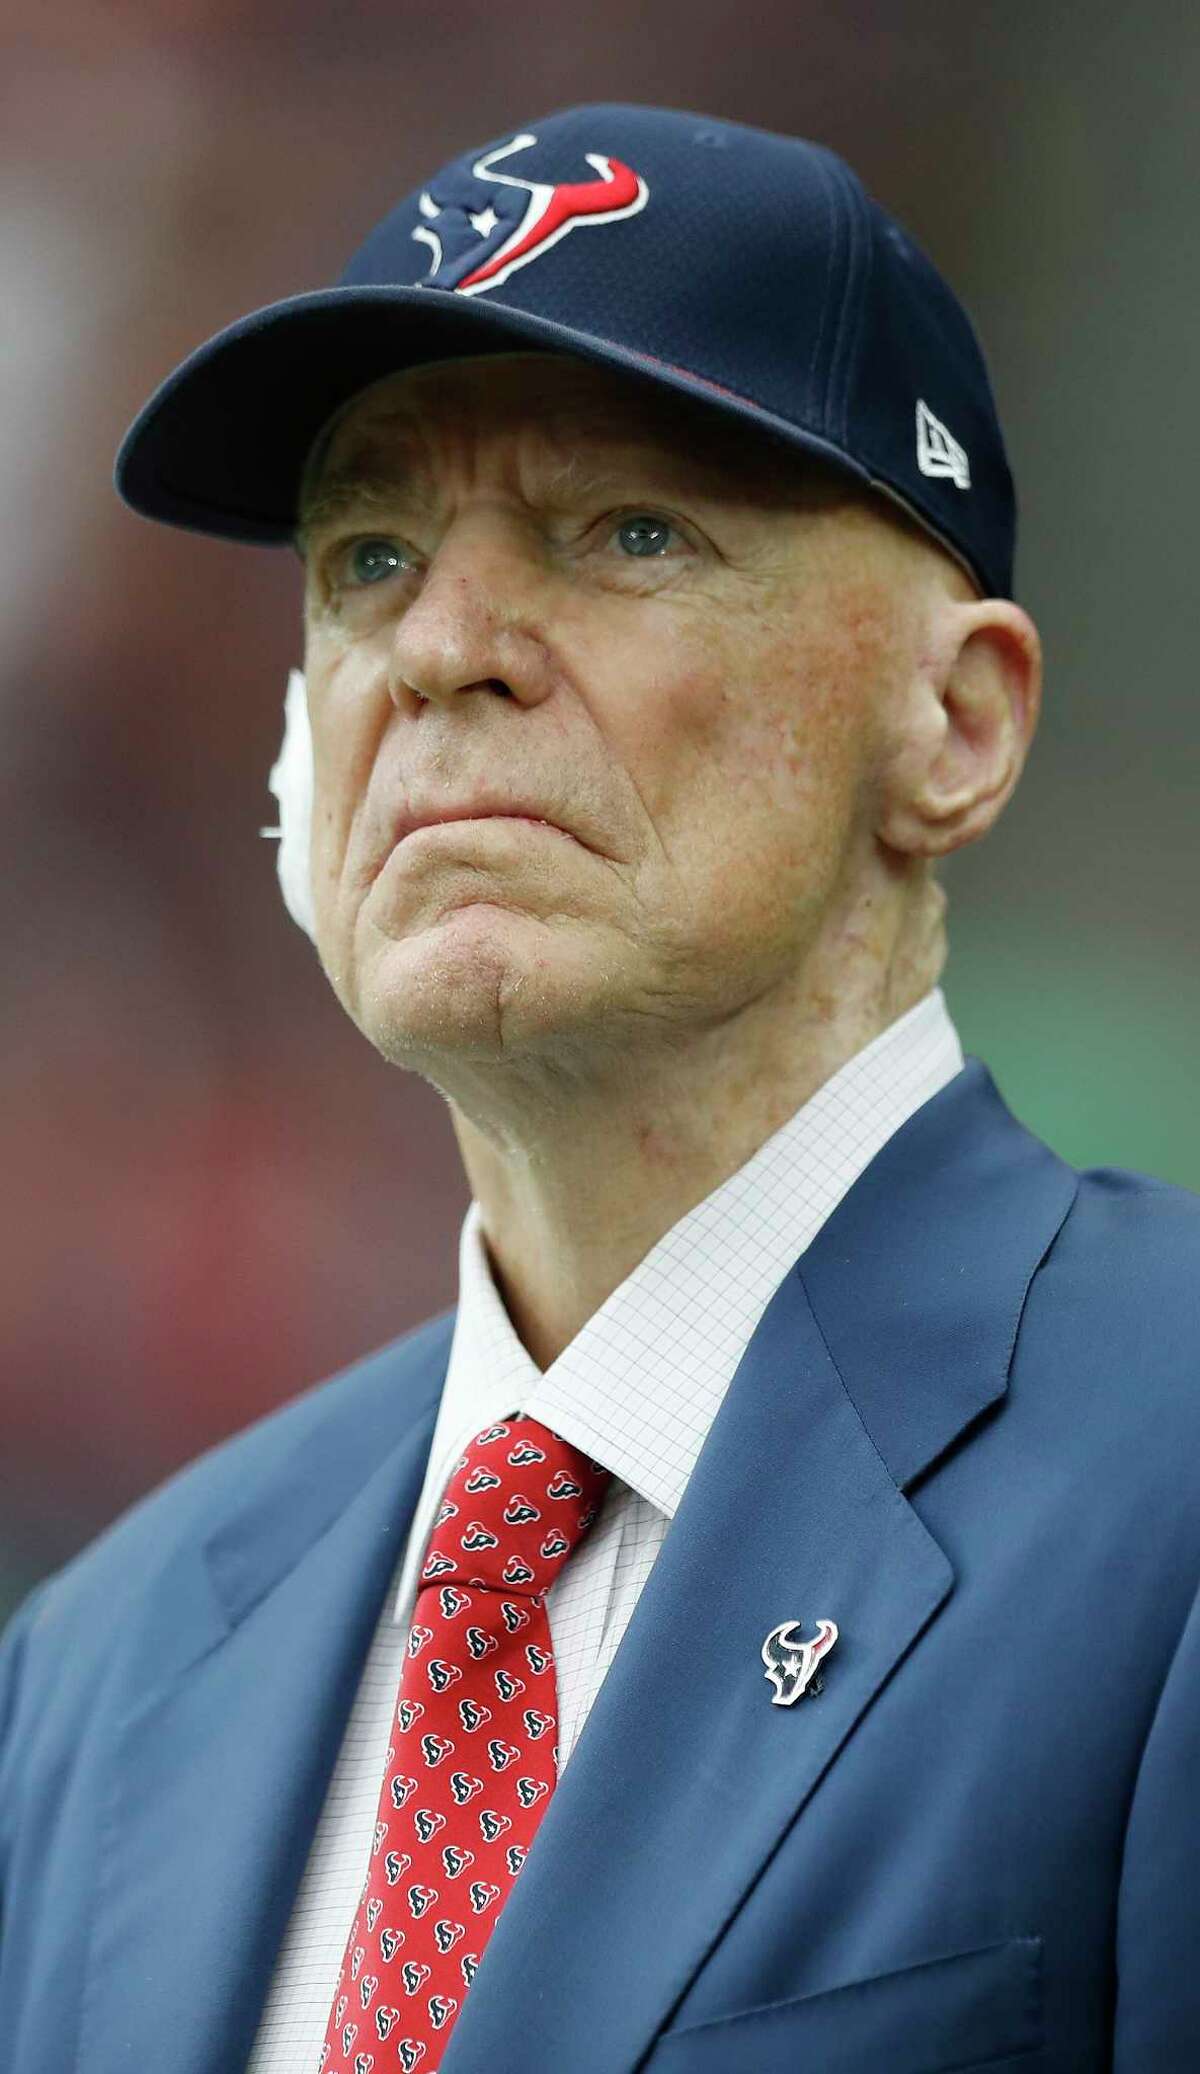 Houston Texans owner Bob McNair watches the game from the field during the first quarter of an NFL football game at NRG Stadium, Sunday, Oct. 1, 2017, in Houston. ( Karen Warren / Houston Chronicle )